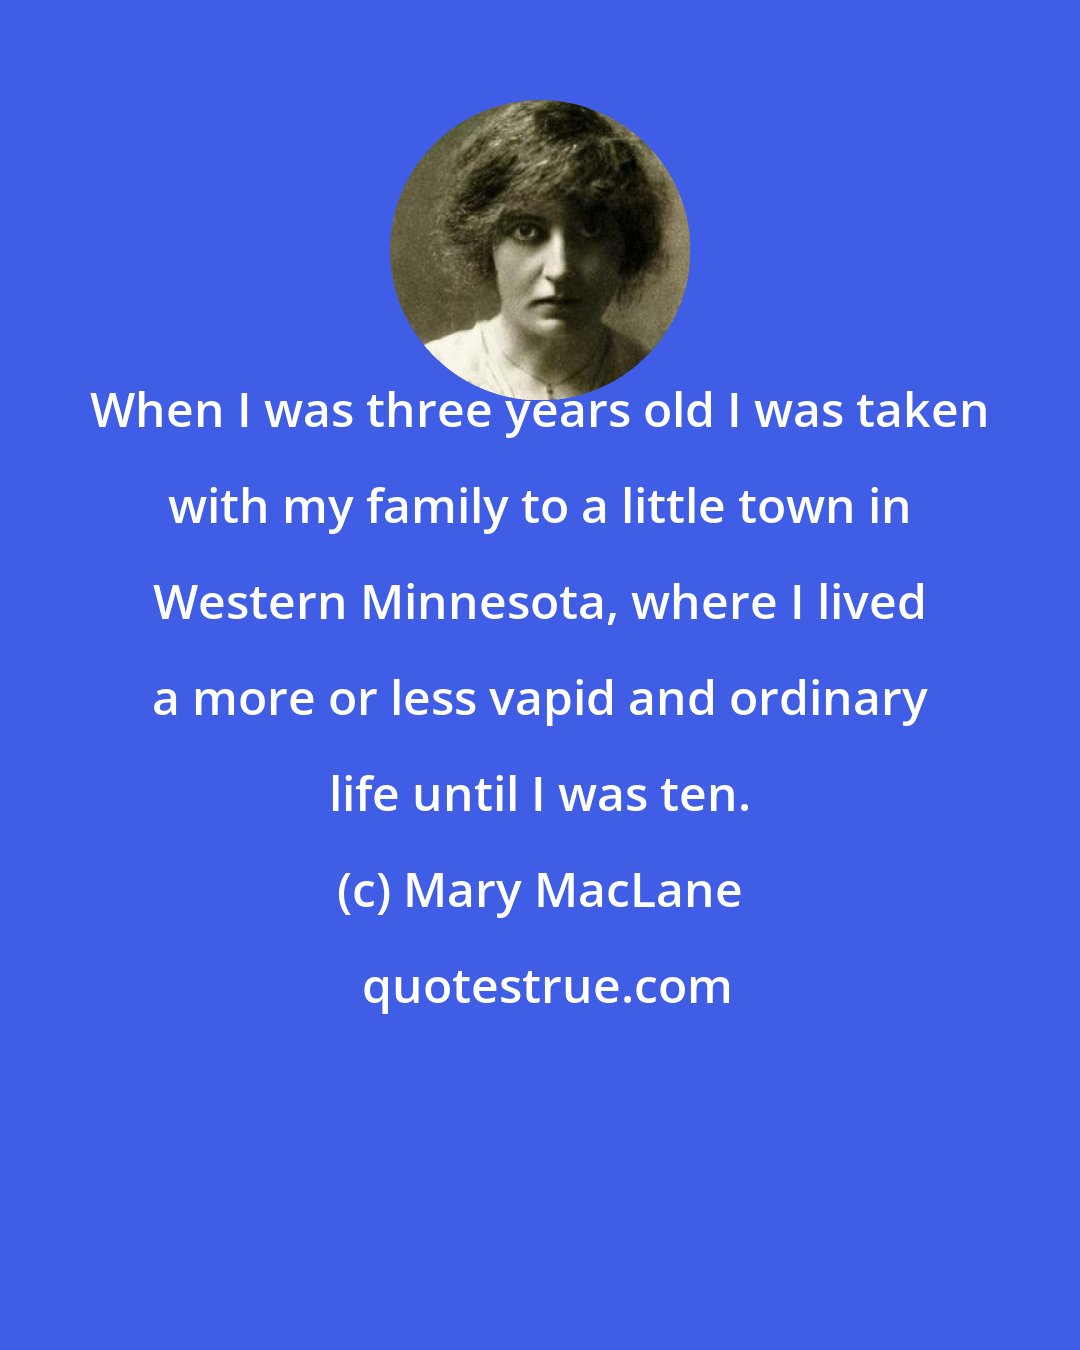 Mary MacLane: When I was three years old I was taken with my family to a little town in Western Minnesota, where I lived a more or less vapid and ordinary life until I was ten.